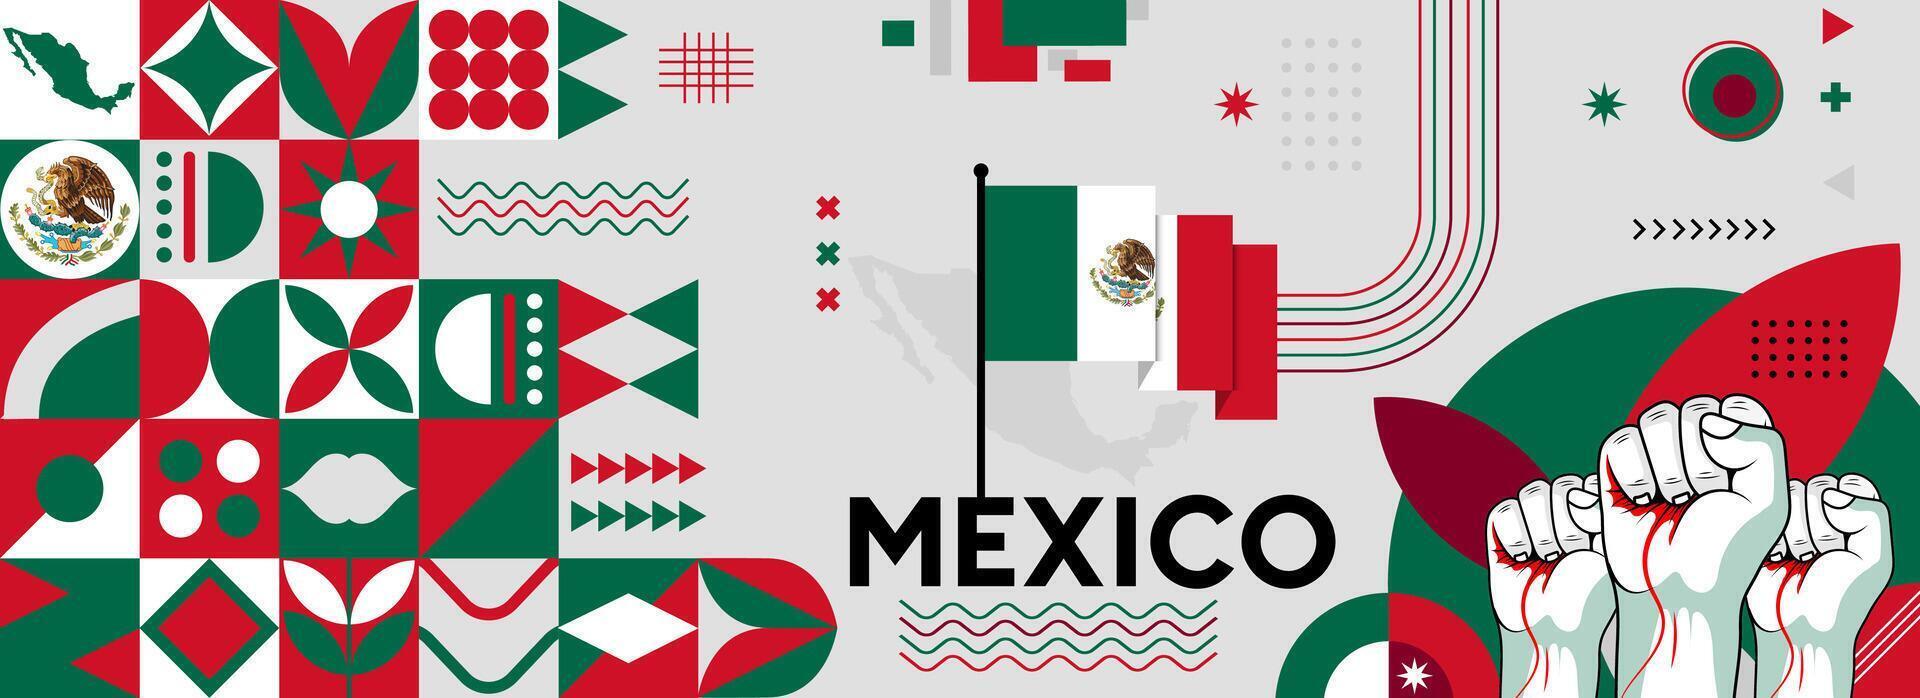 Mexico national or independence day banner for country celebration. Flag and map of Mexico with raised fists. Modern retro design with typorgaphy abstract geometric icons. Vector illustration